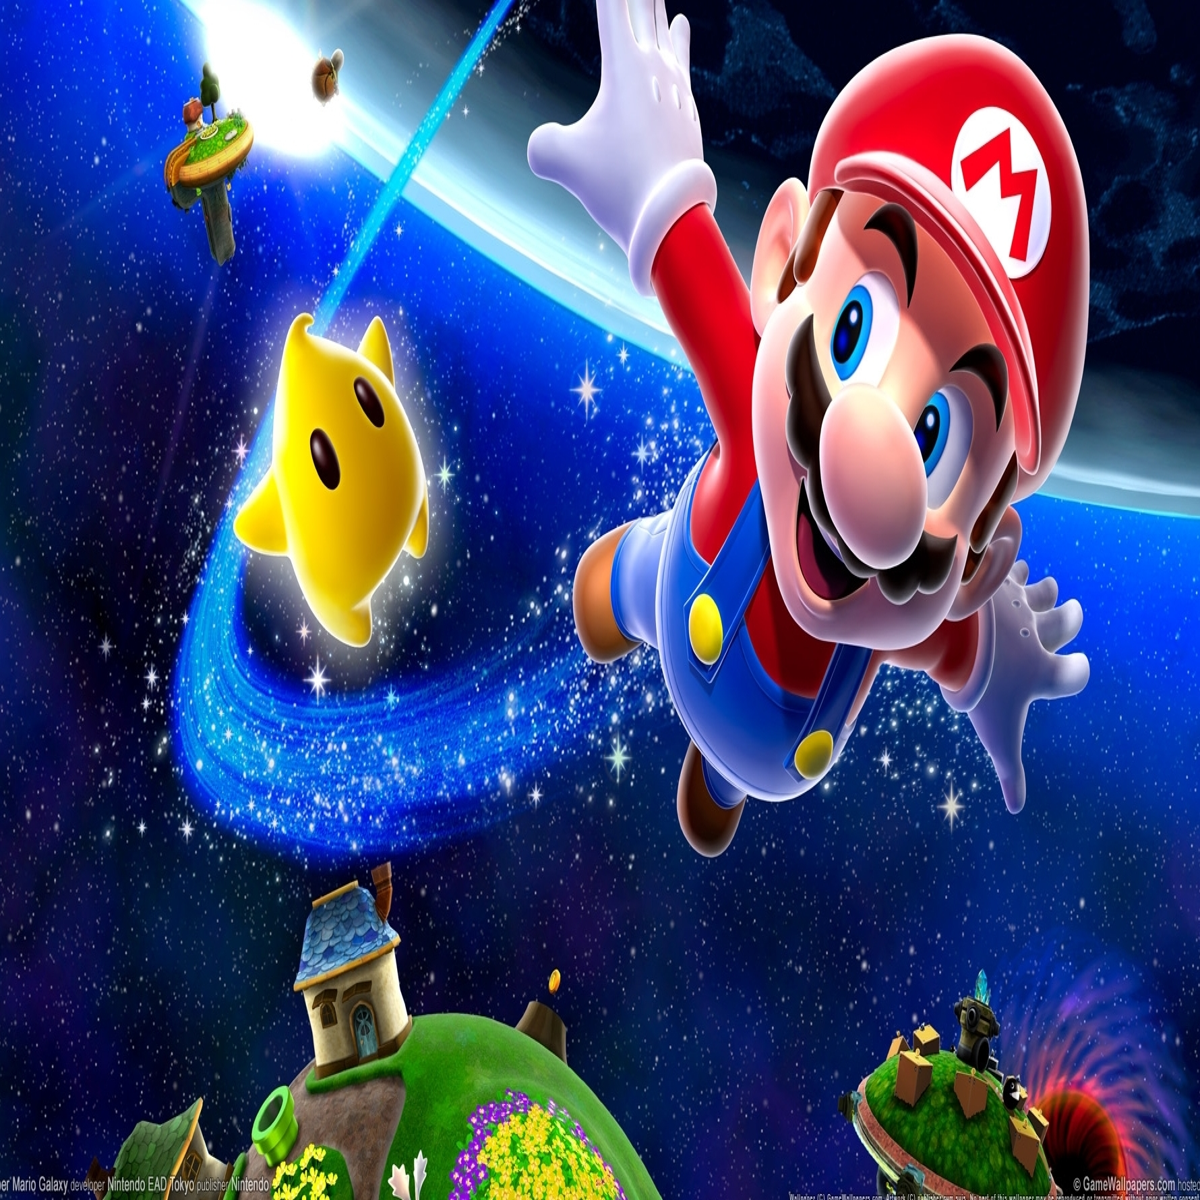 Super Mario 3D All-Stars for Nintendo Switch review: The port does